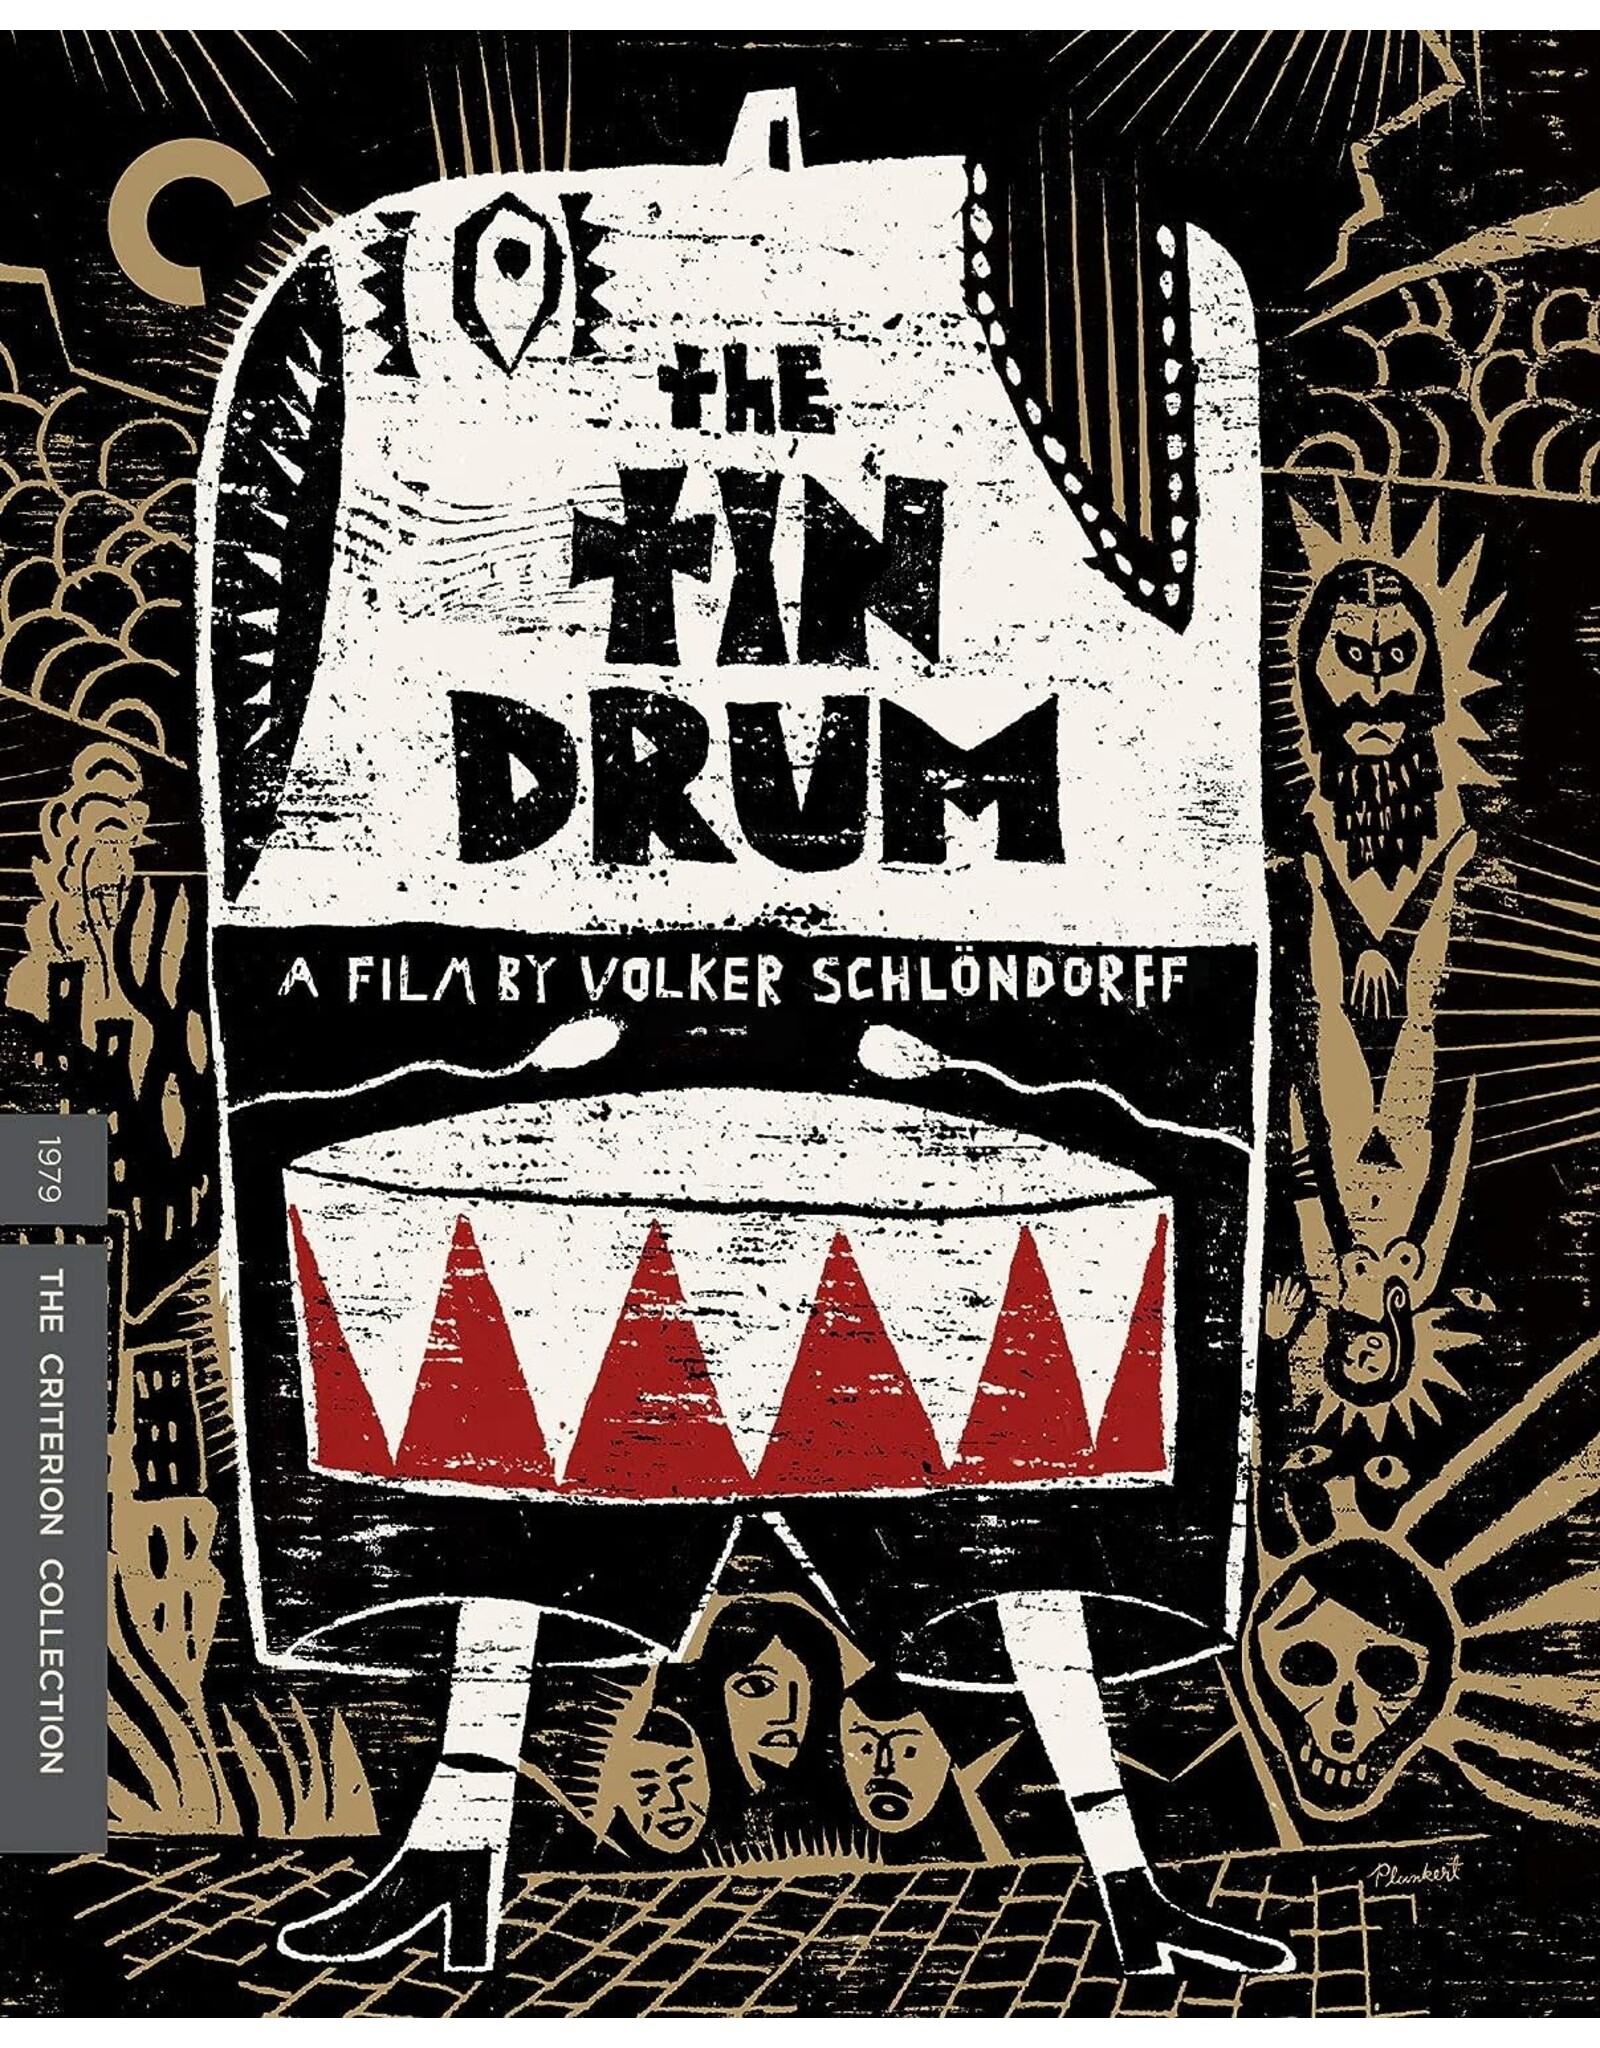 Criterion Collection Tin Drum, The - Criterion Collection (Used)